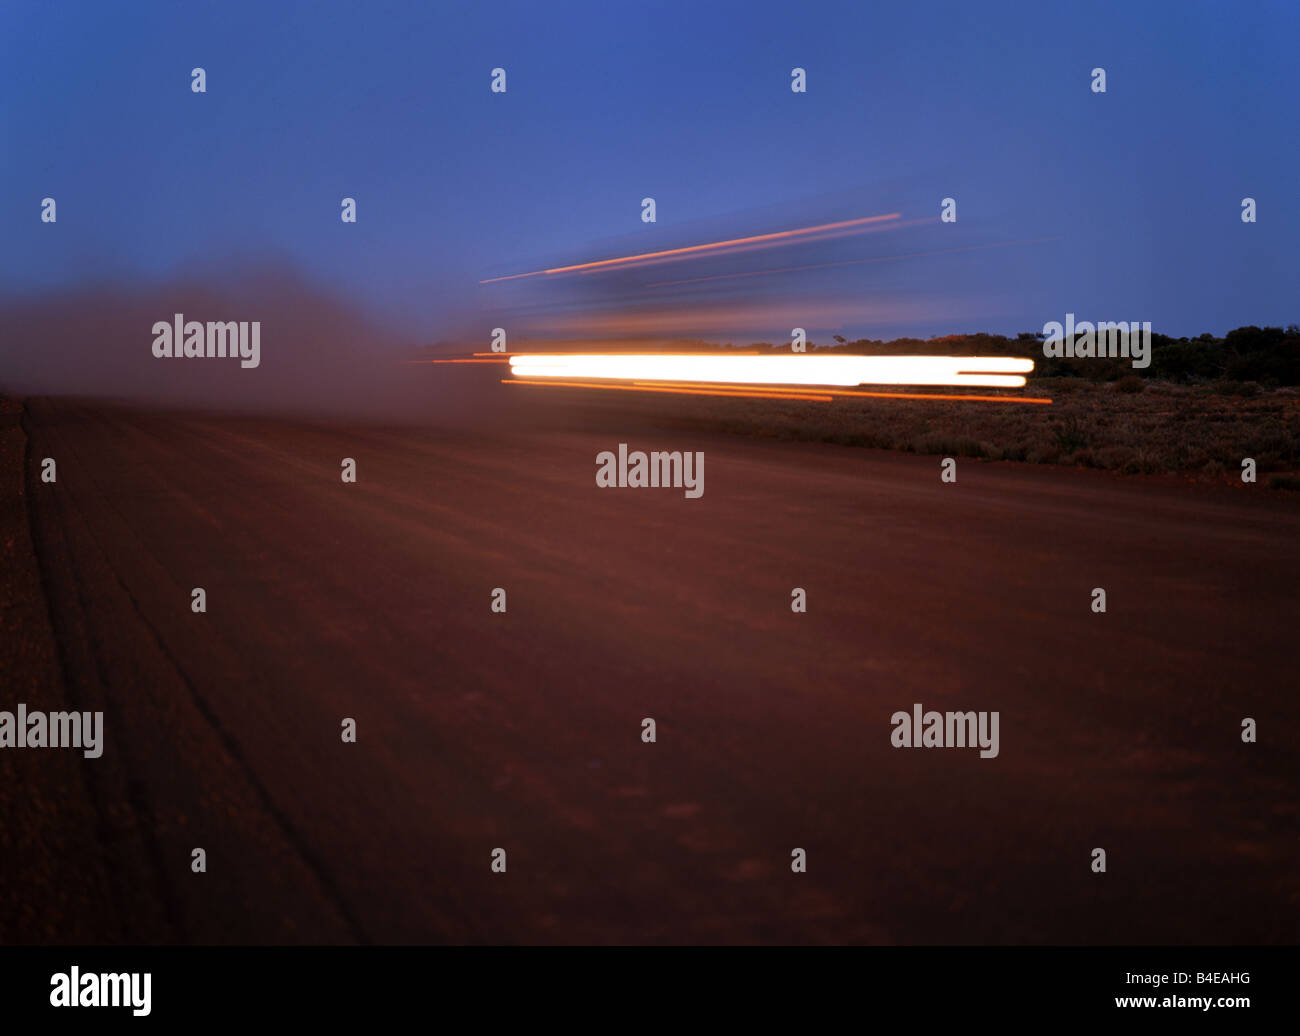 Moving Automobile Lights on Australian Outback Road Stock Photo